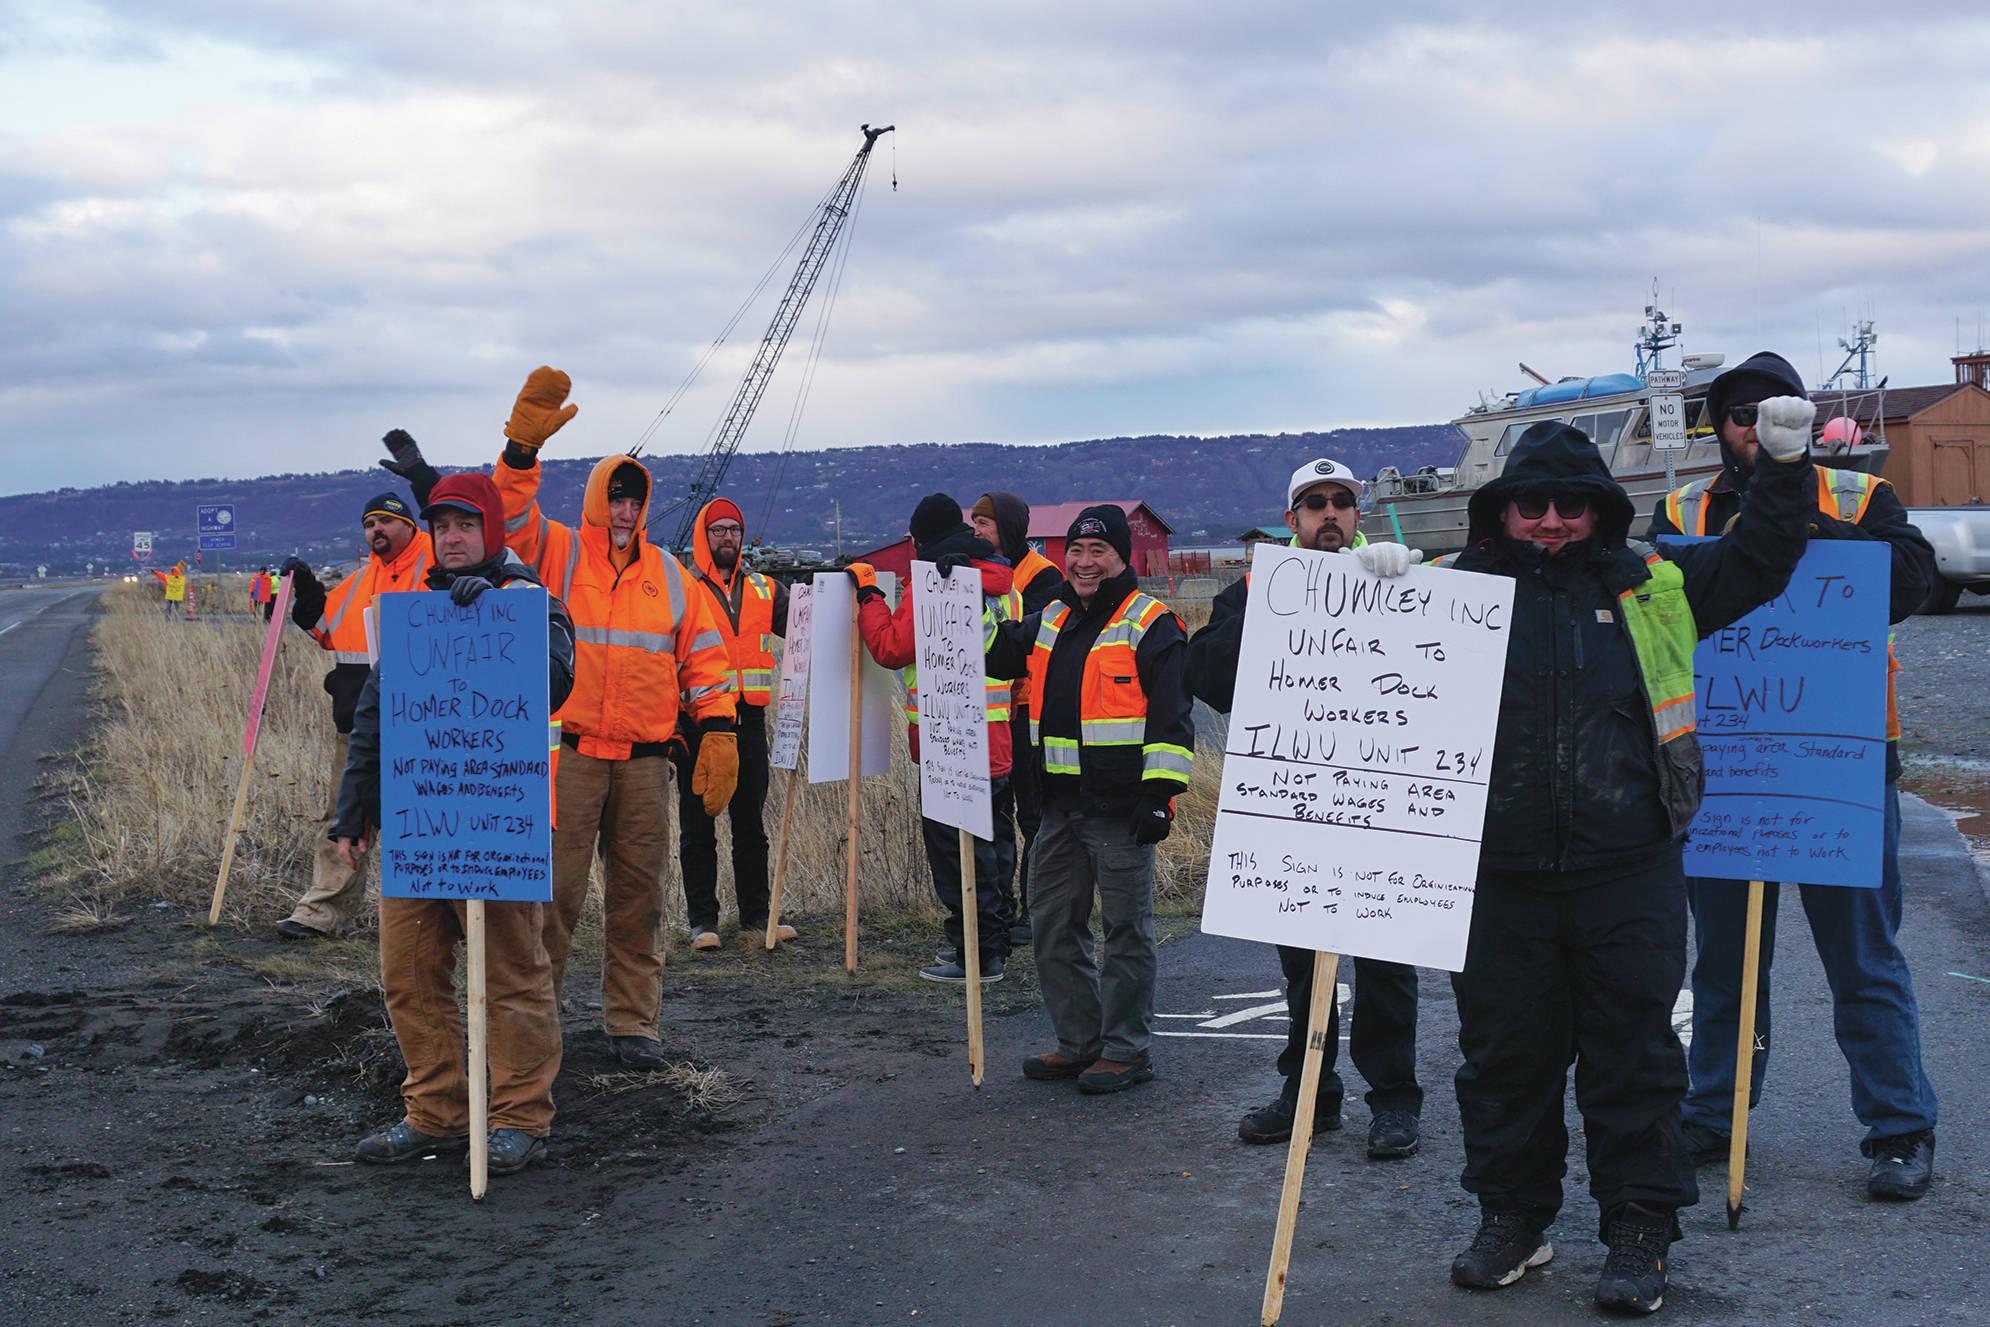 Longshore workers picket on the Homer Spit by Freight Dock Road on Tuesday, Dec. 17, 2019, in Homer, Alaska. They were part of a group of about 20 Alaska International Longshore and Warehouse Union members or supporters holding an “area standards” picket in response to Chumley’s Inc. use of workers to load a sulfur hauler ship the ILWU alleges are paid substandard wages. (Photo by Michael Armstrong/Homer News)